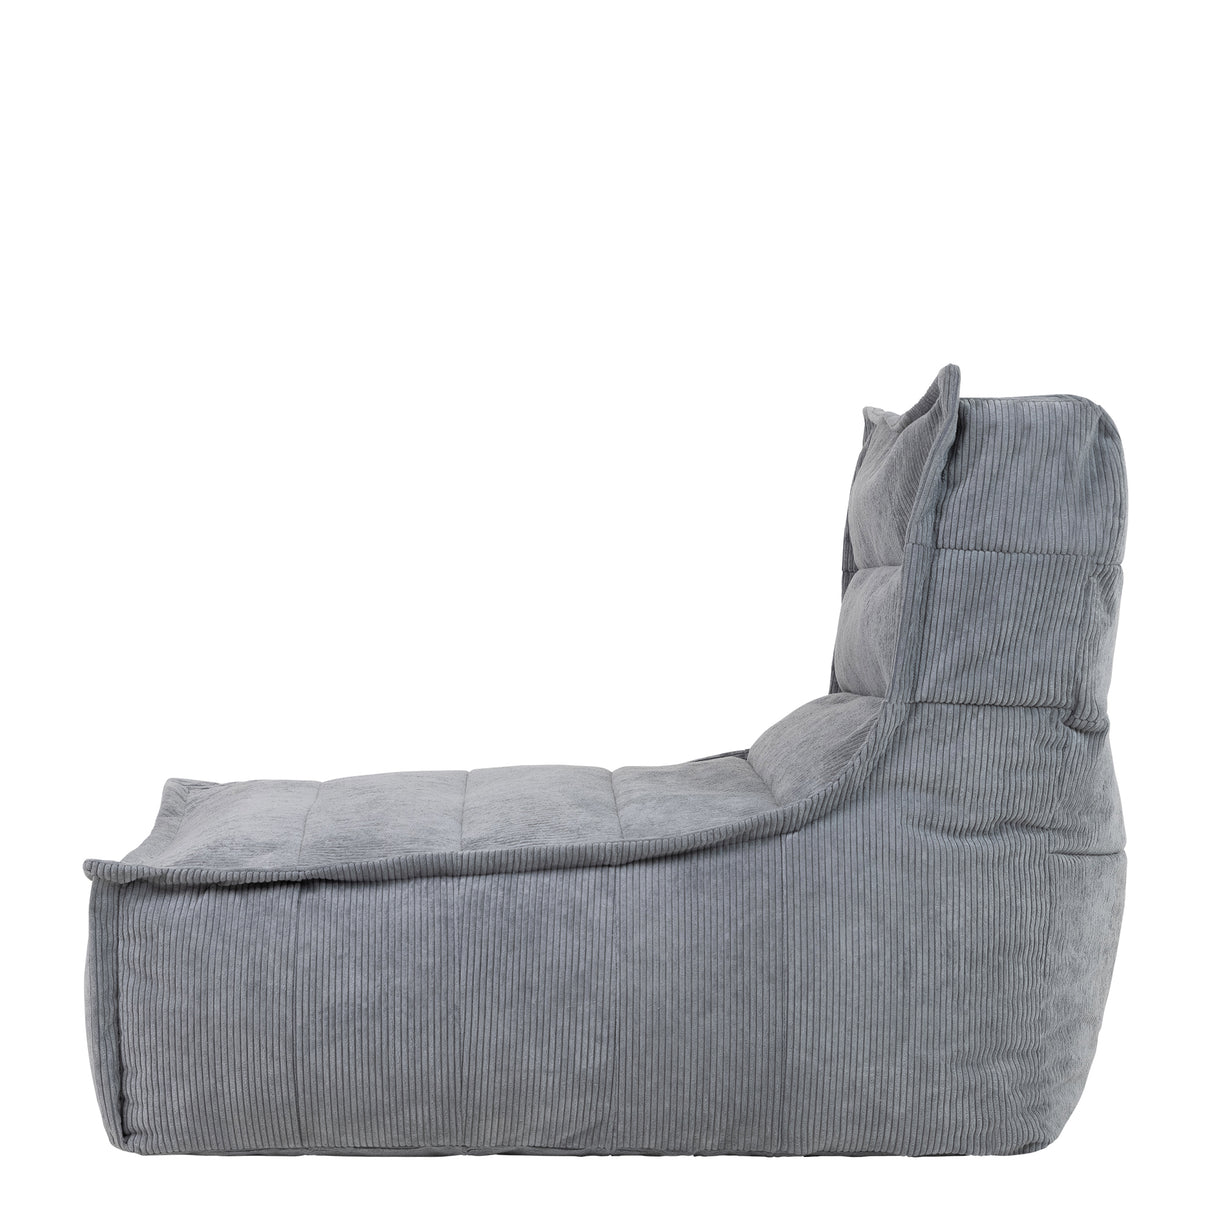 Cord Lounger - Charcoal Grey